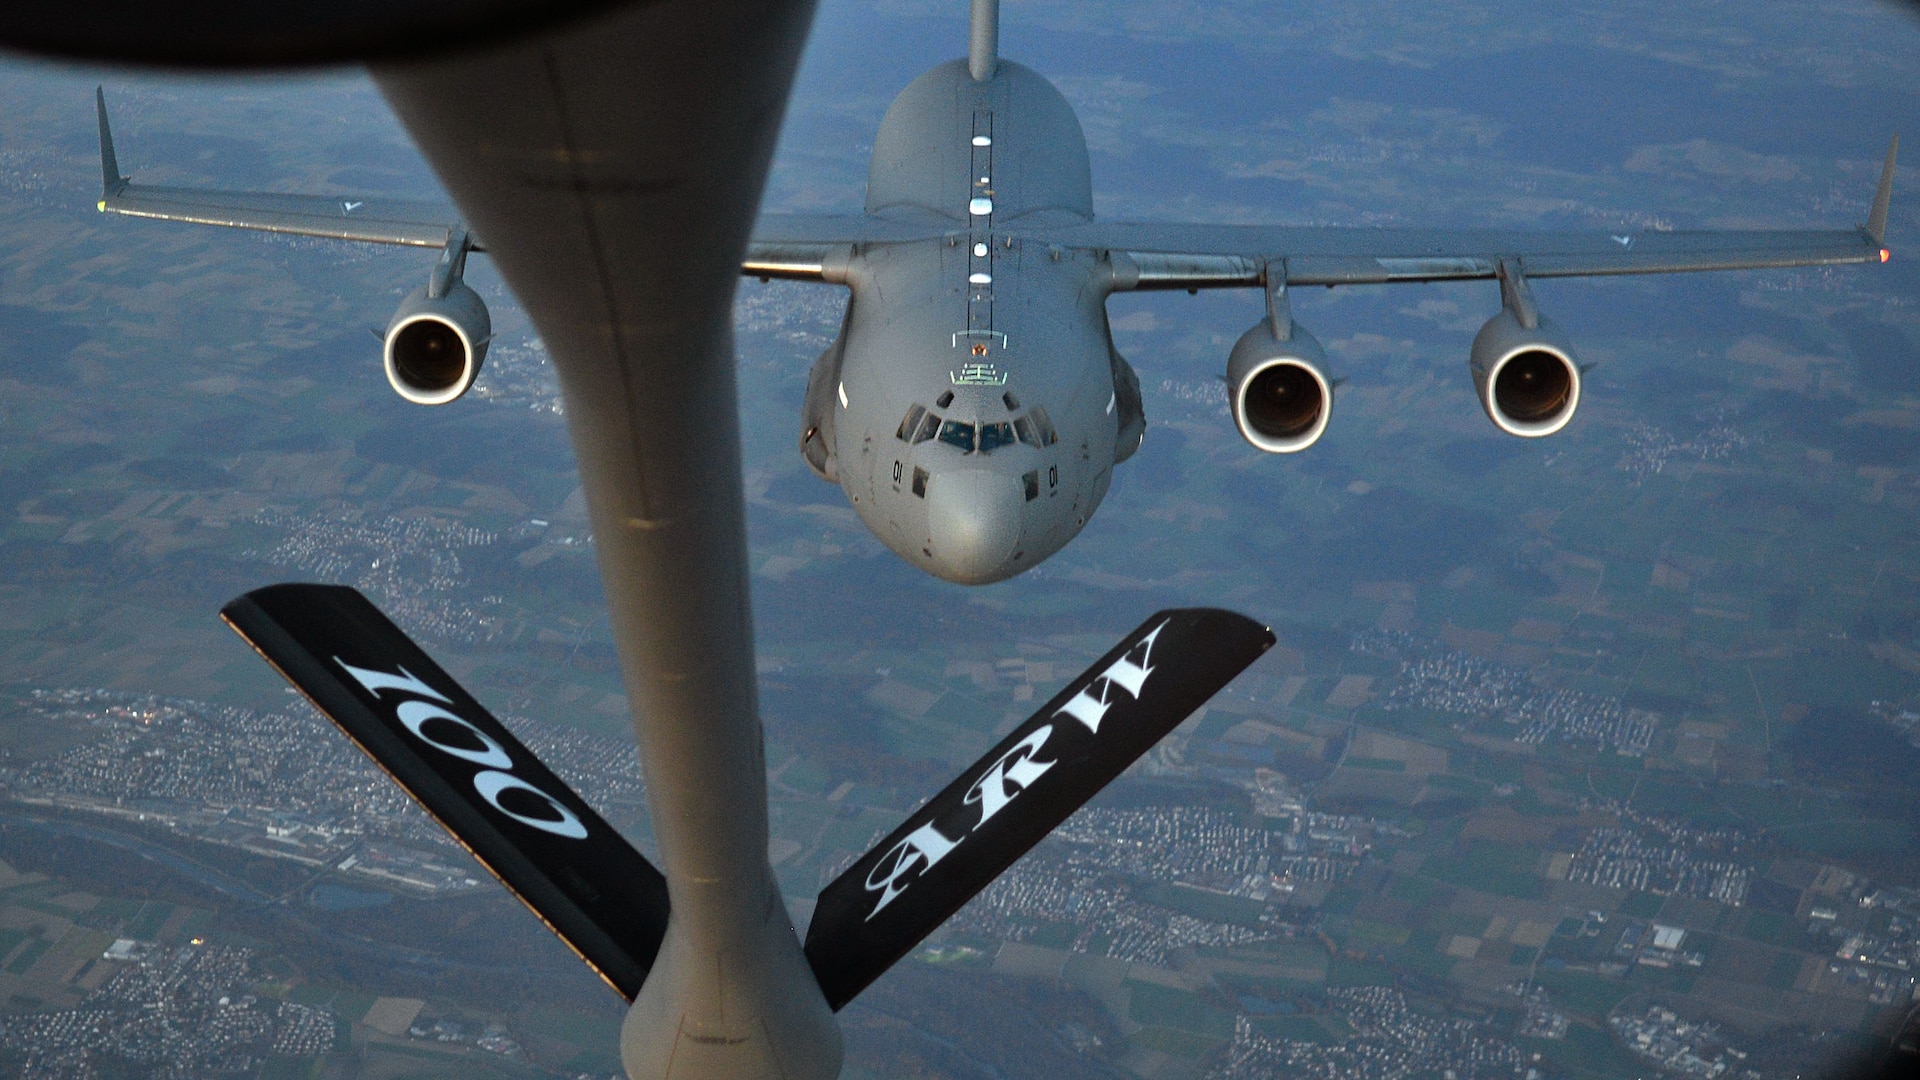 A C-17 refueling in air